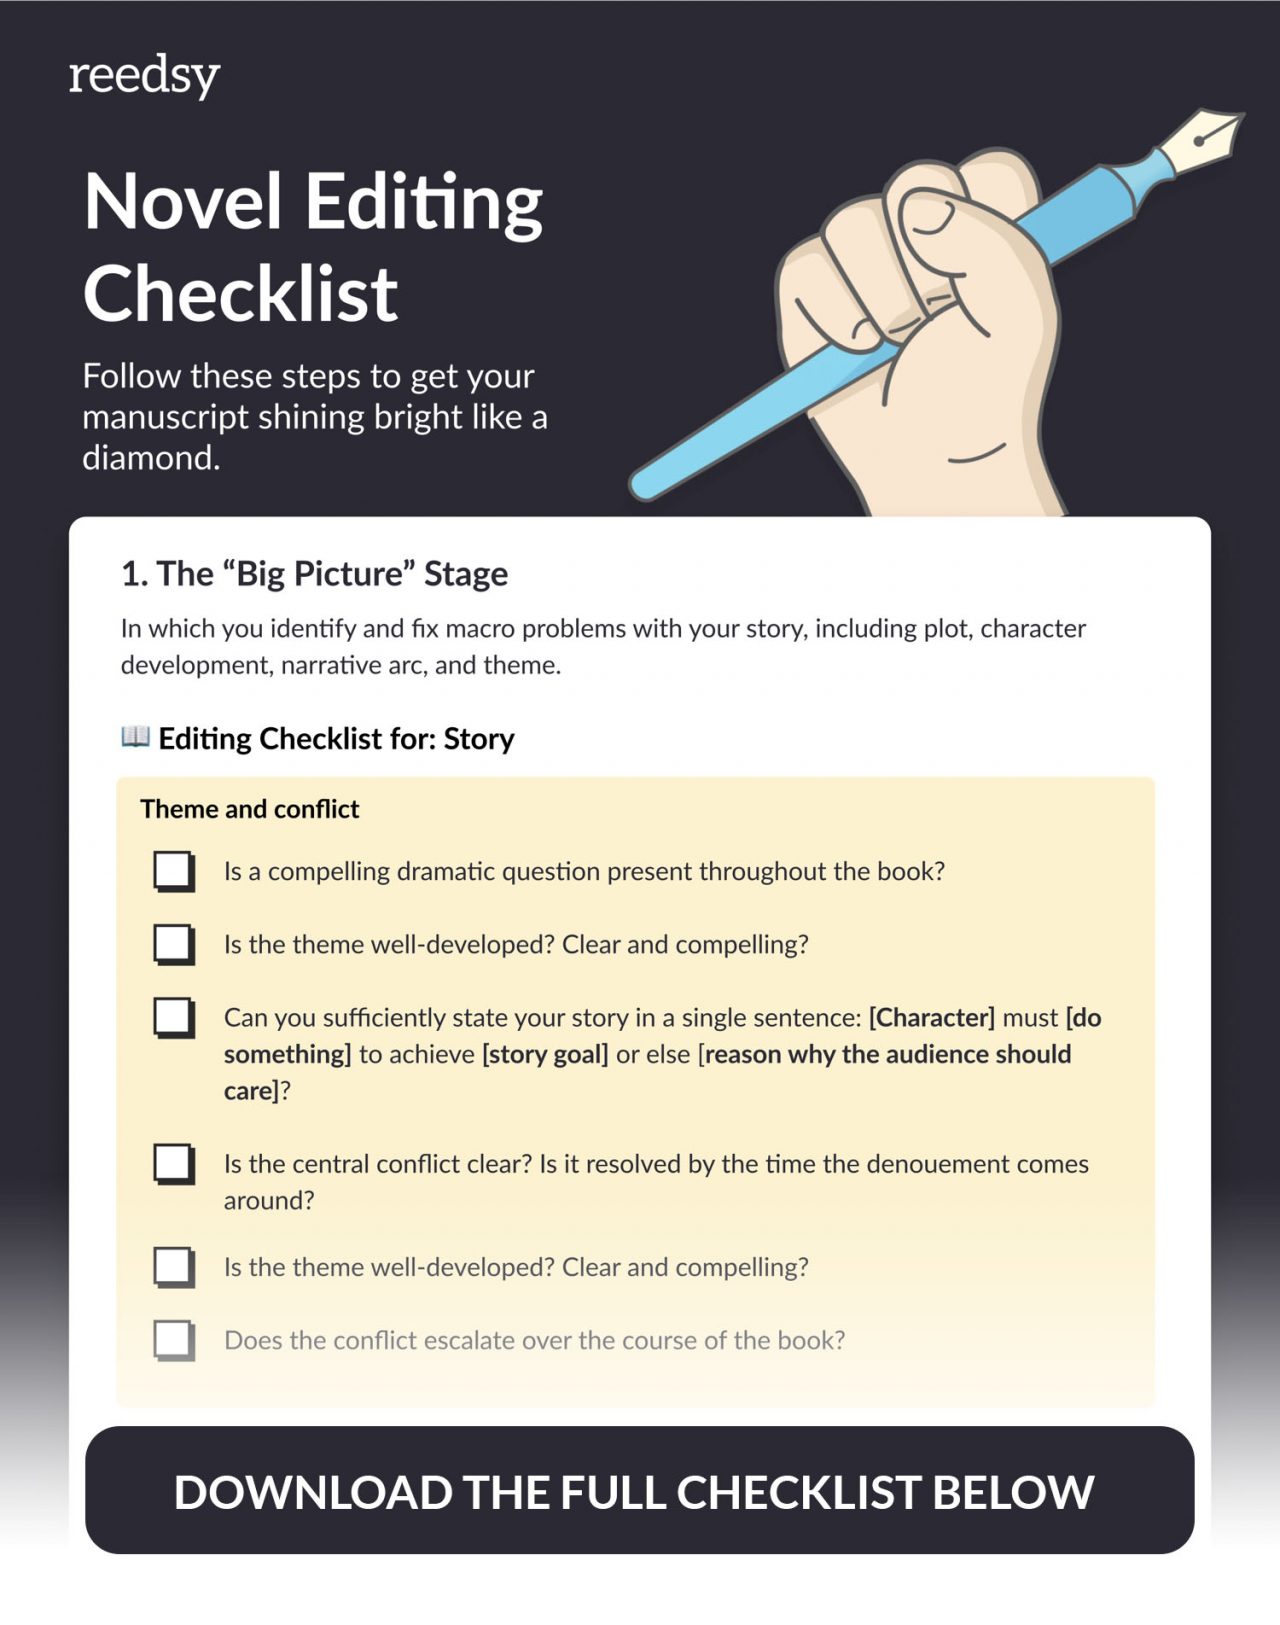 How to Write a Great Book Review (With Structure & Self-Editing Tips)